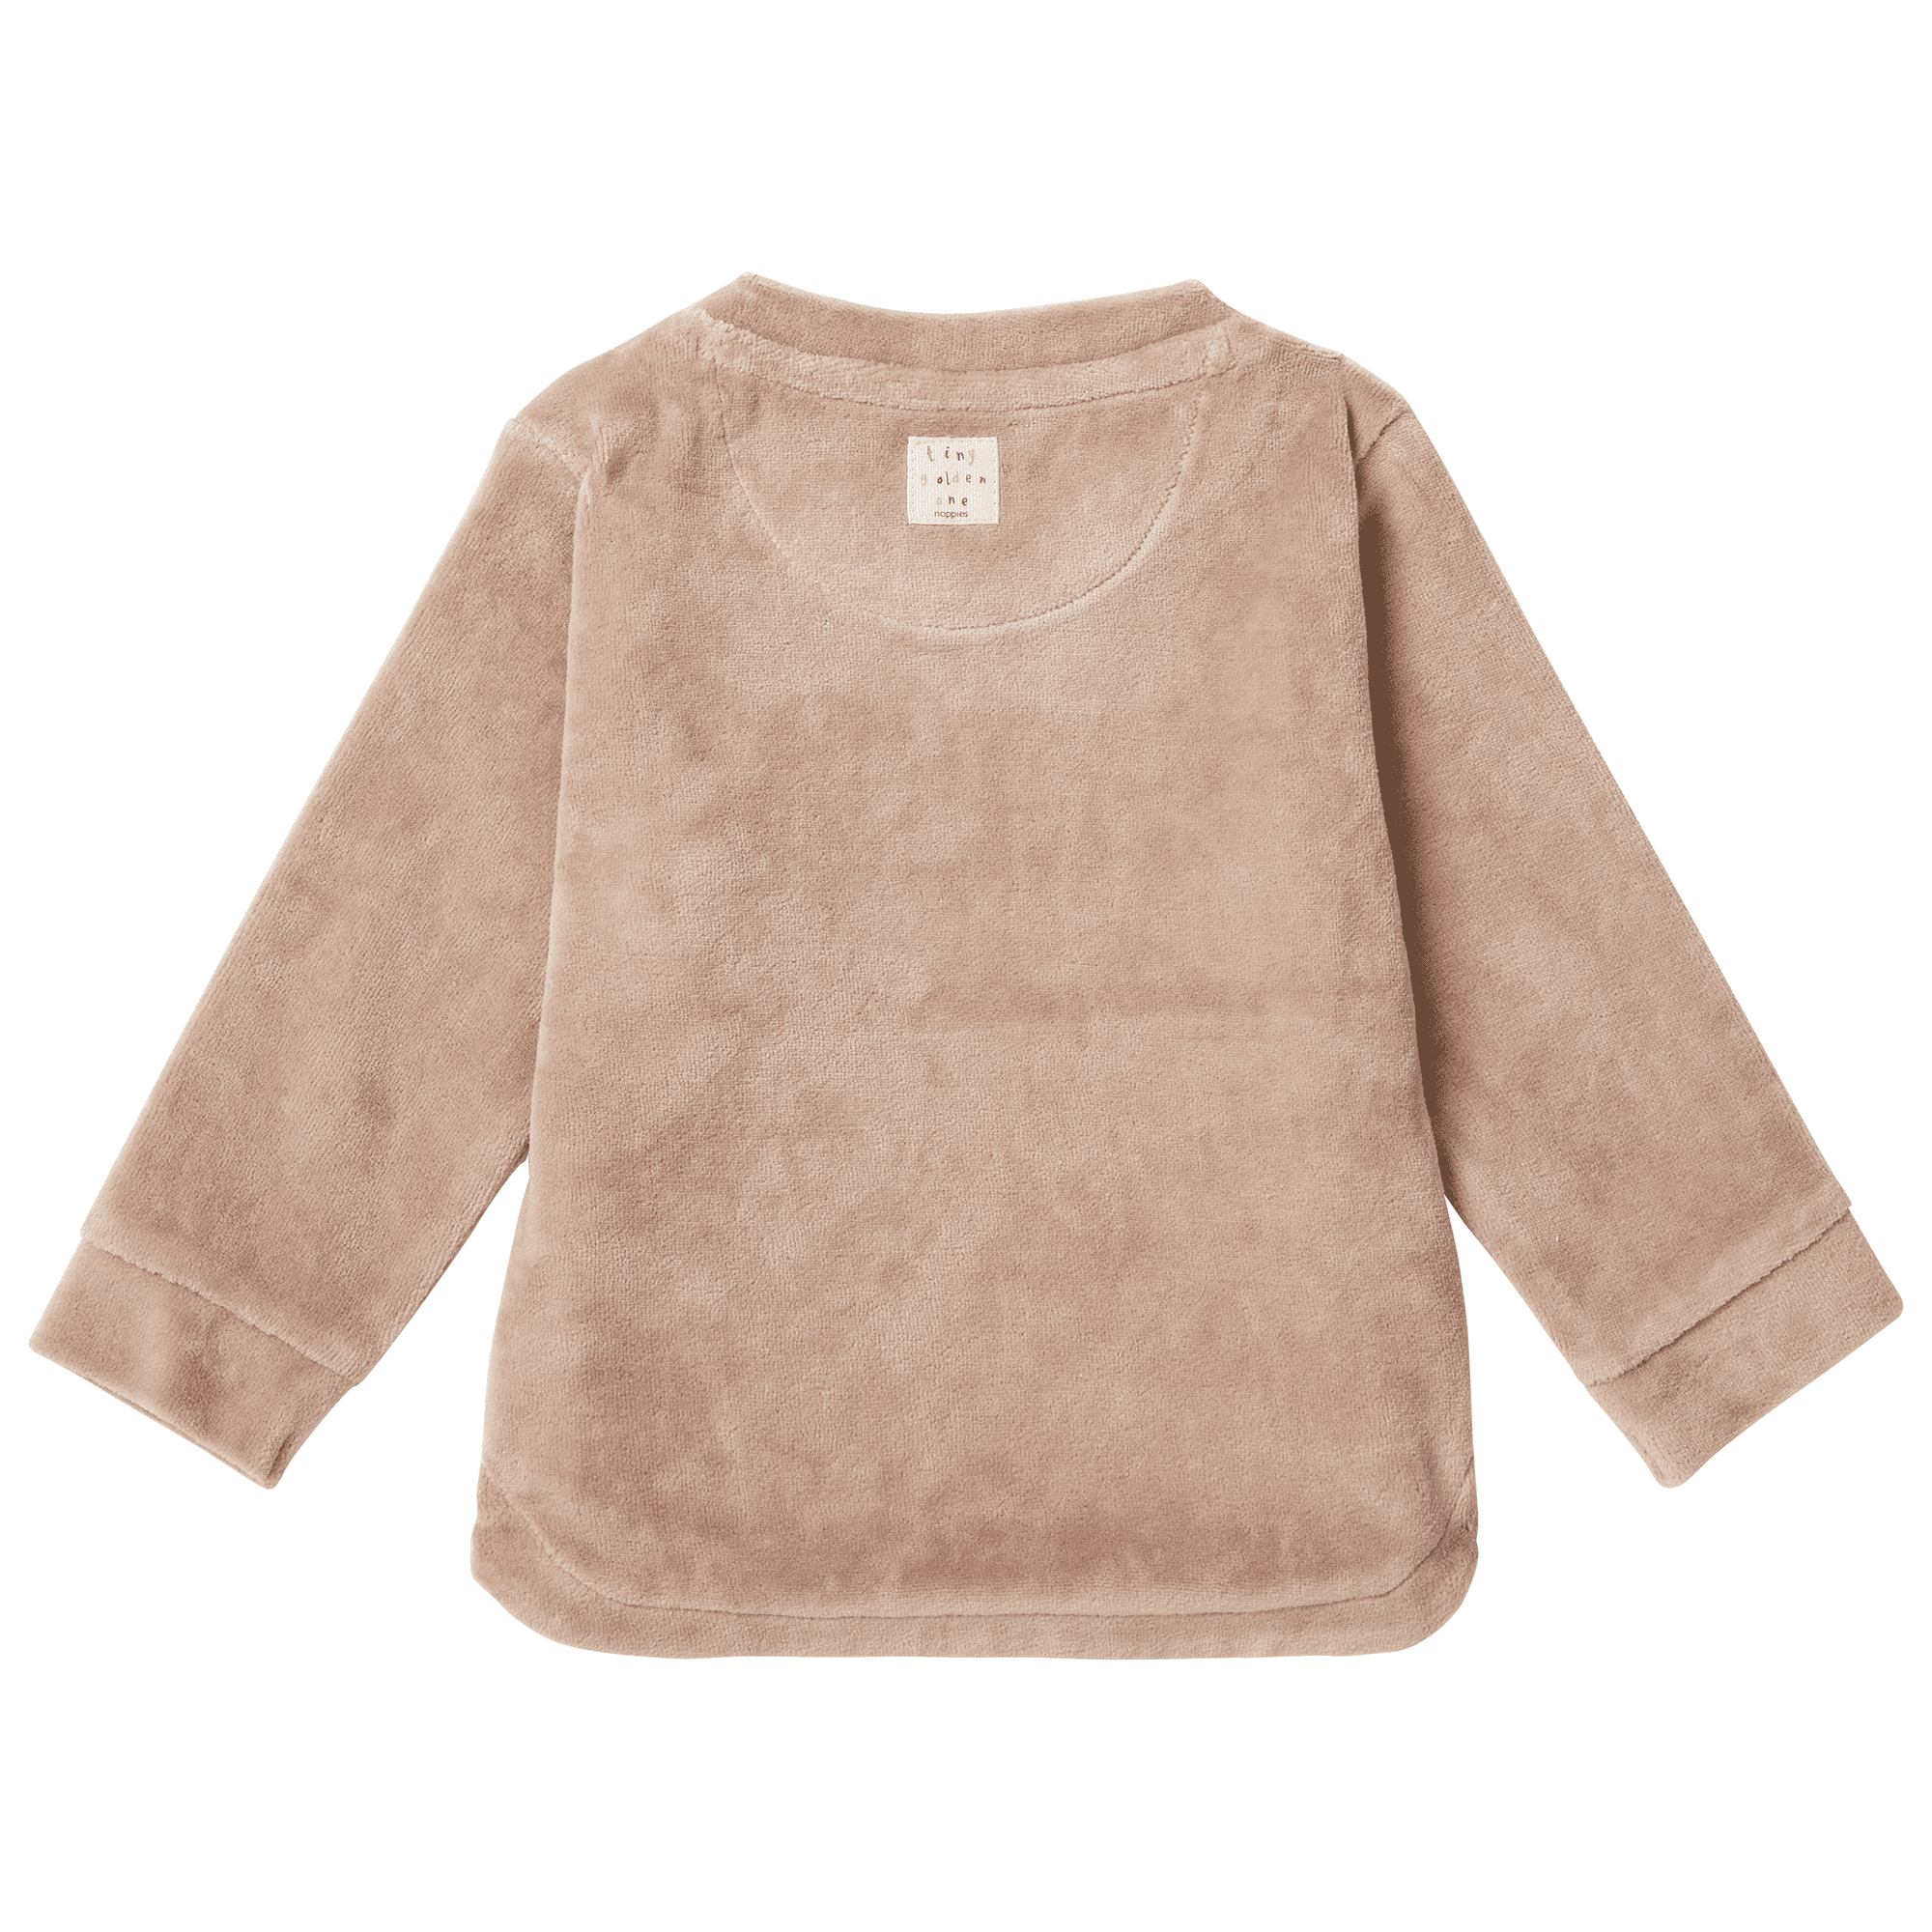 Pullover Tarrant noppies Taupe M2000584843107 2